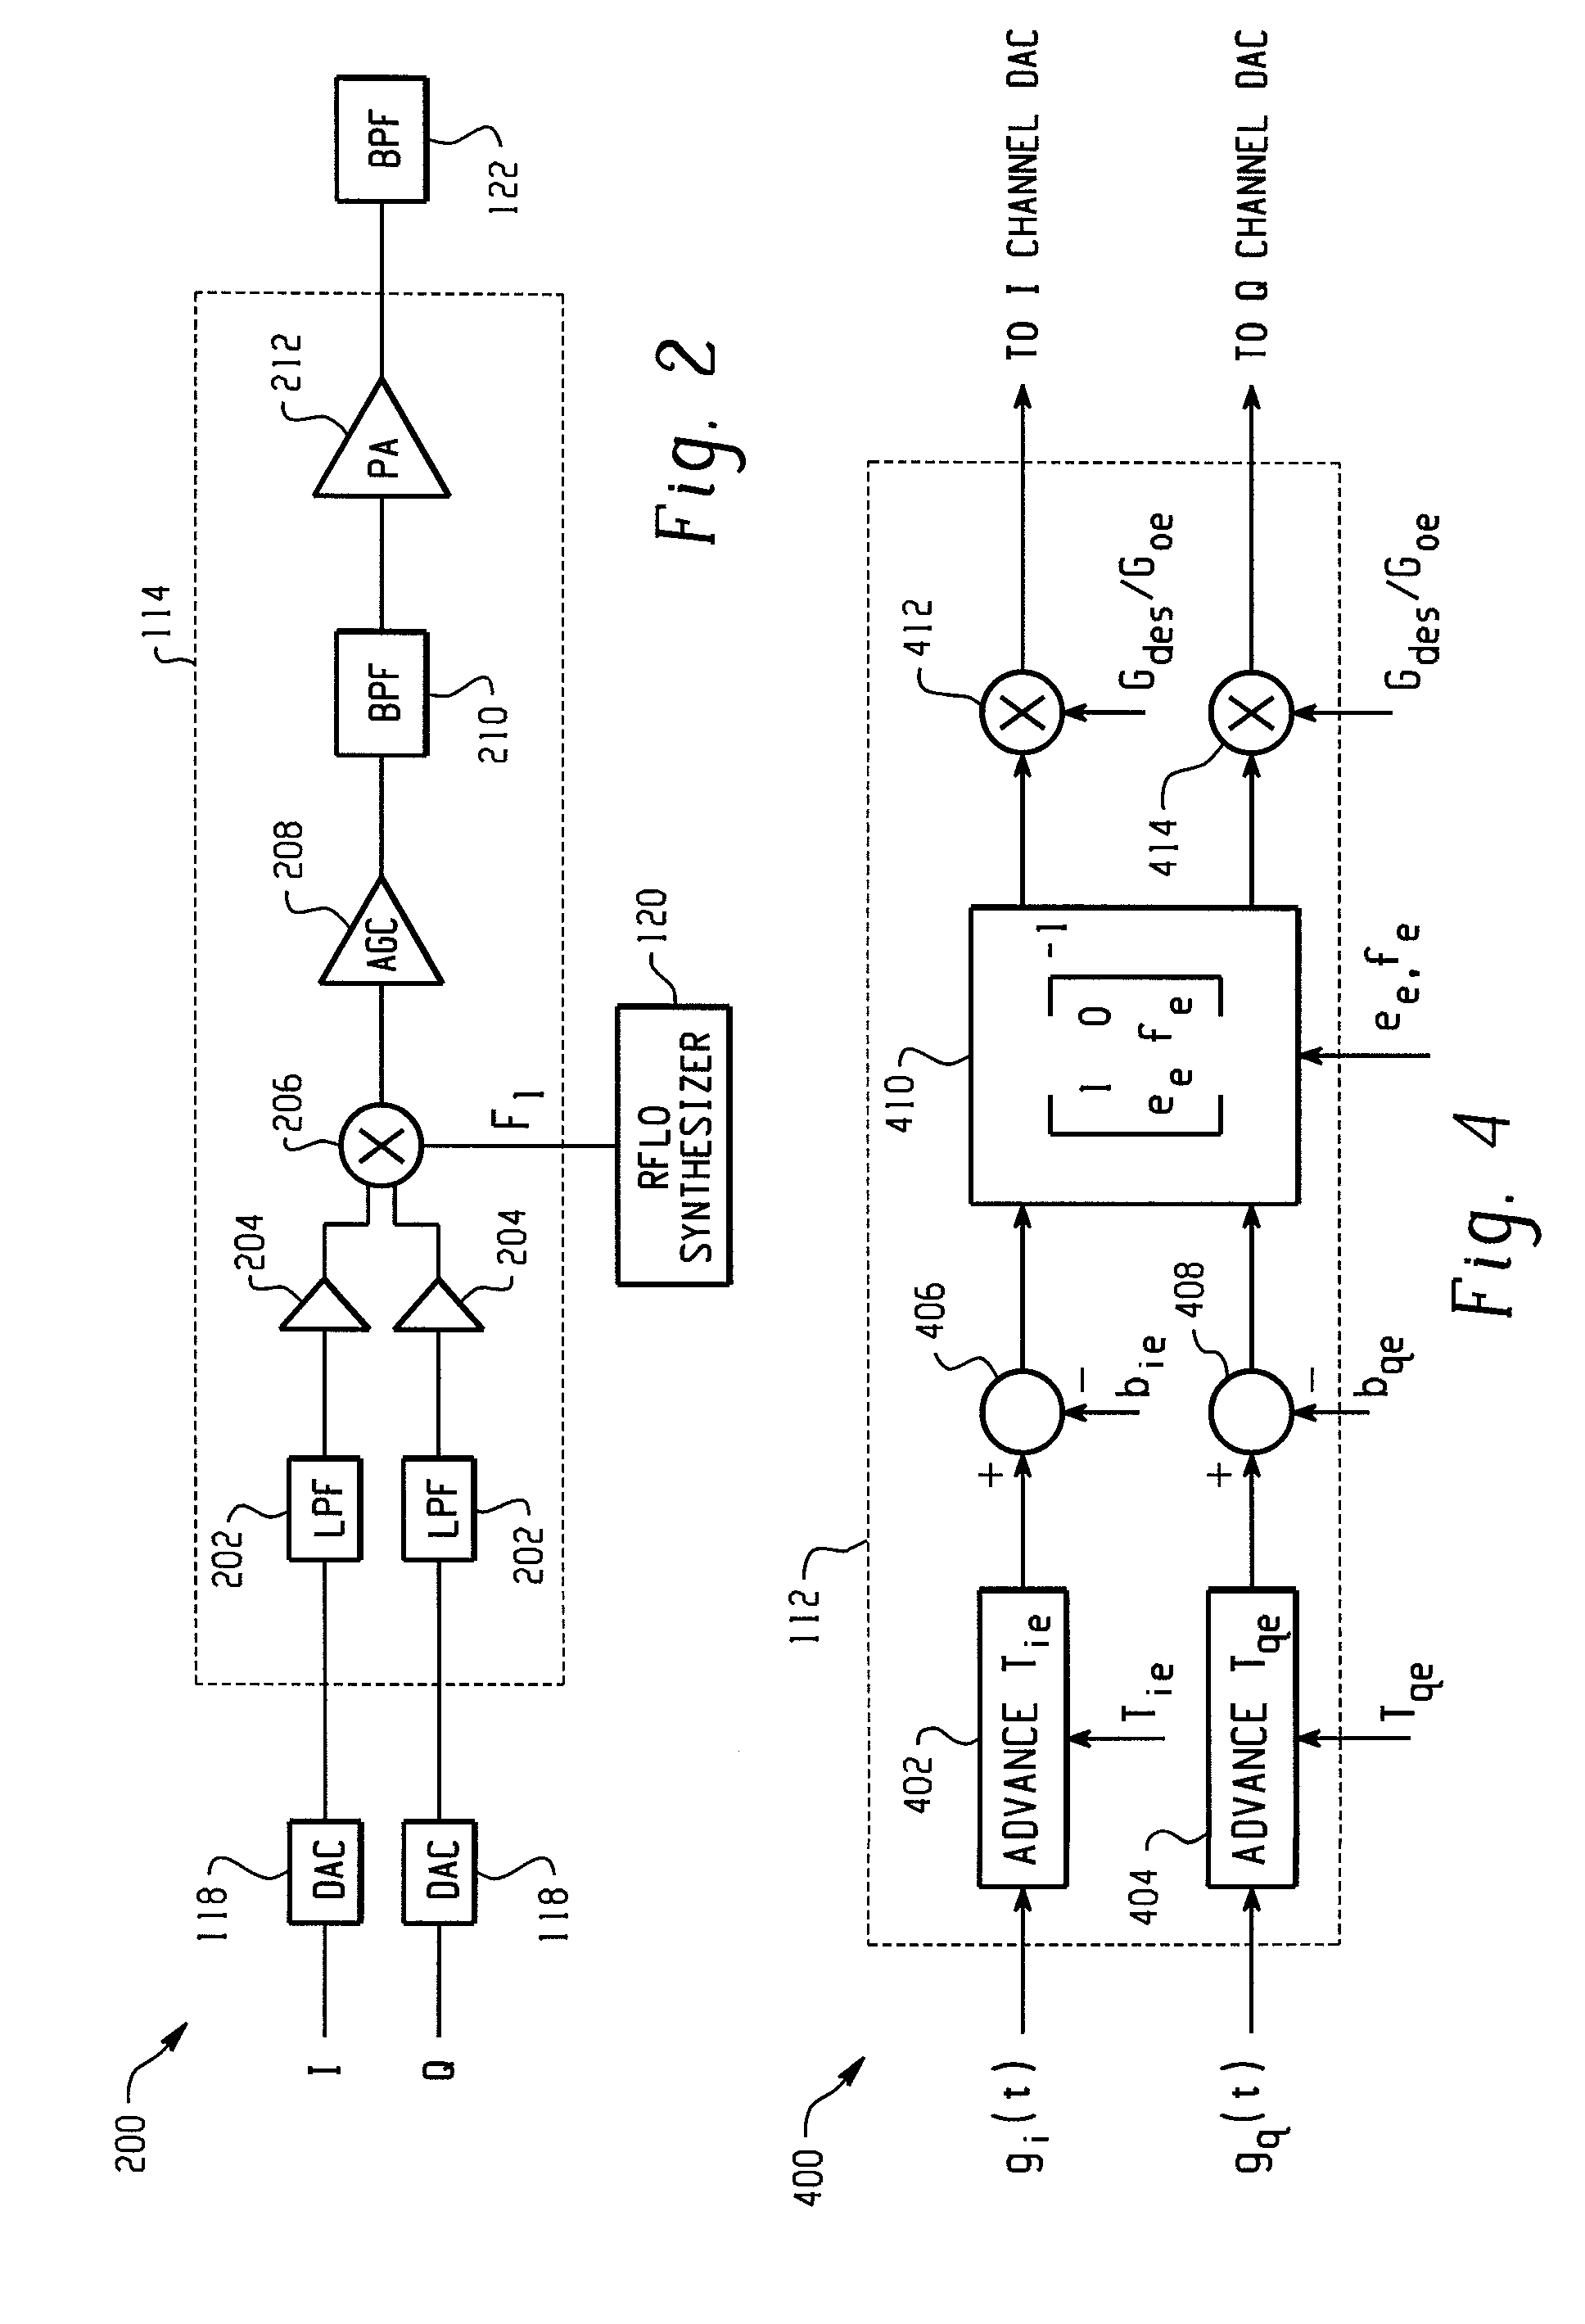 Feedback Compensation Detector For A Direct Conversion Transmitter